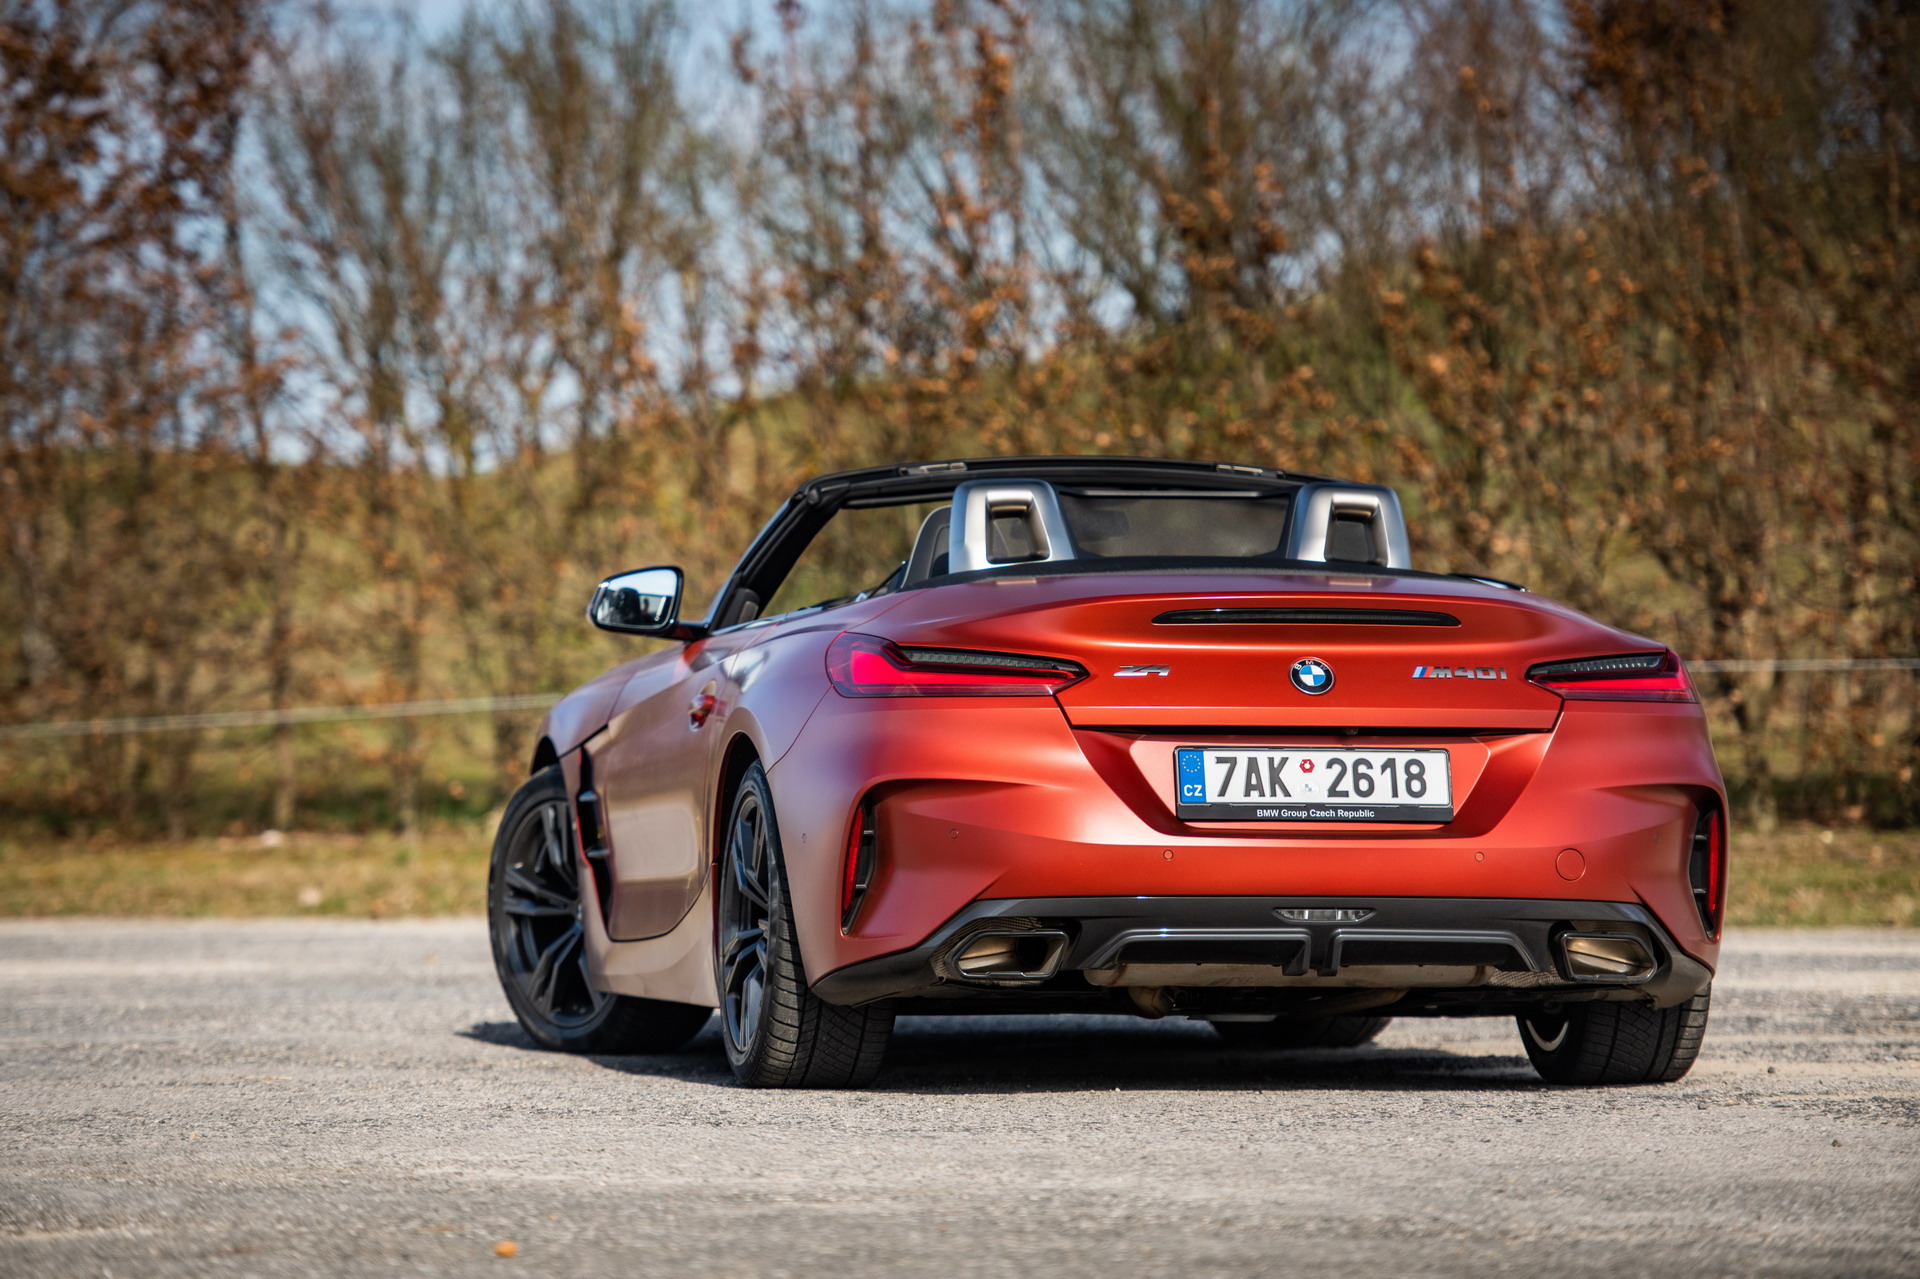 BMW Z4 M40i First Edition featured in Frozen Orange metallic – Cars and